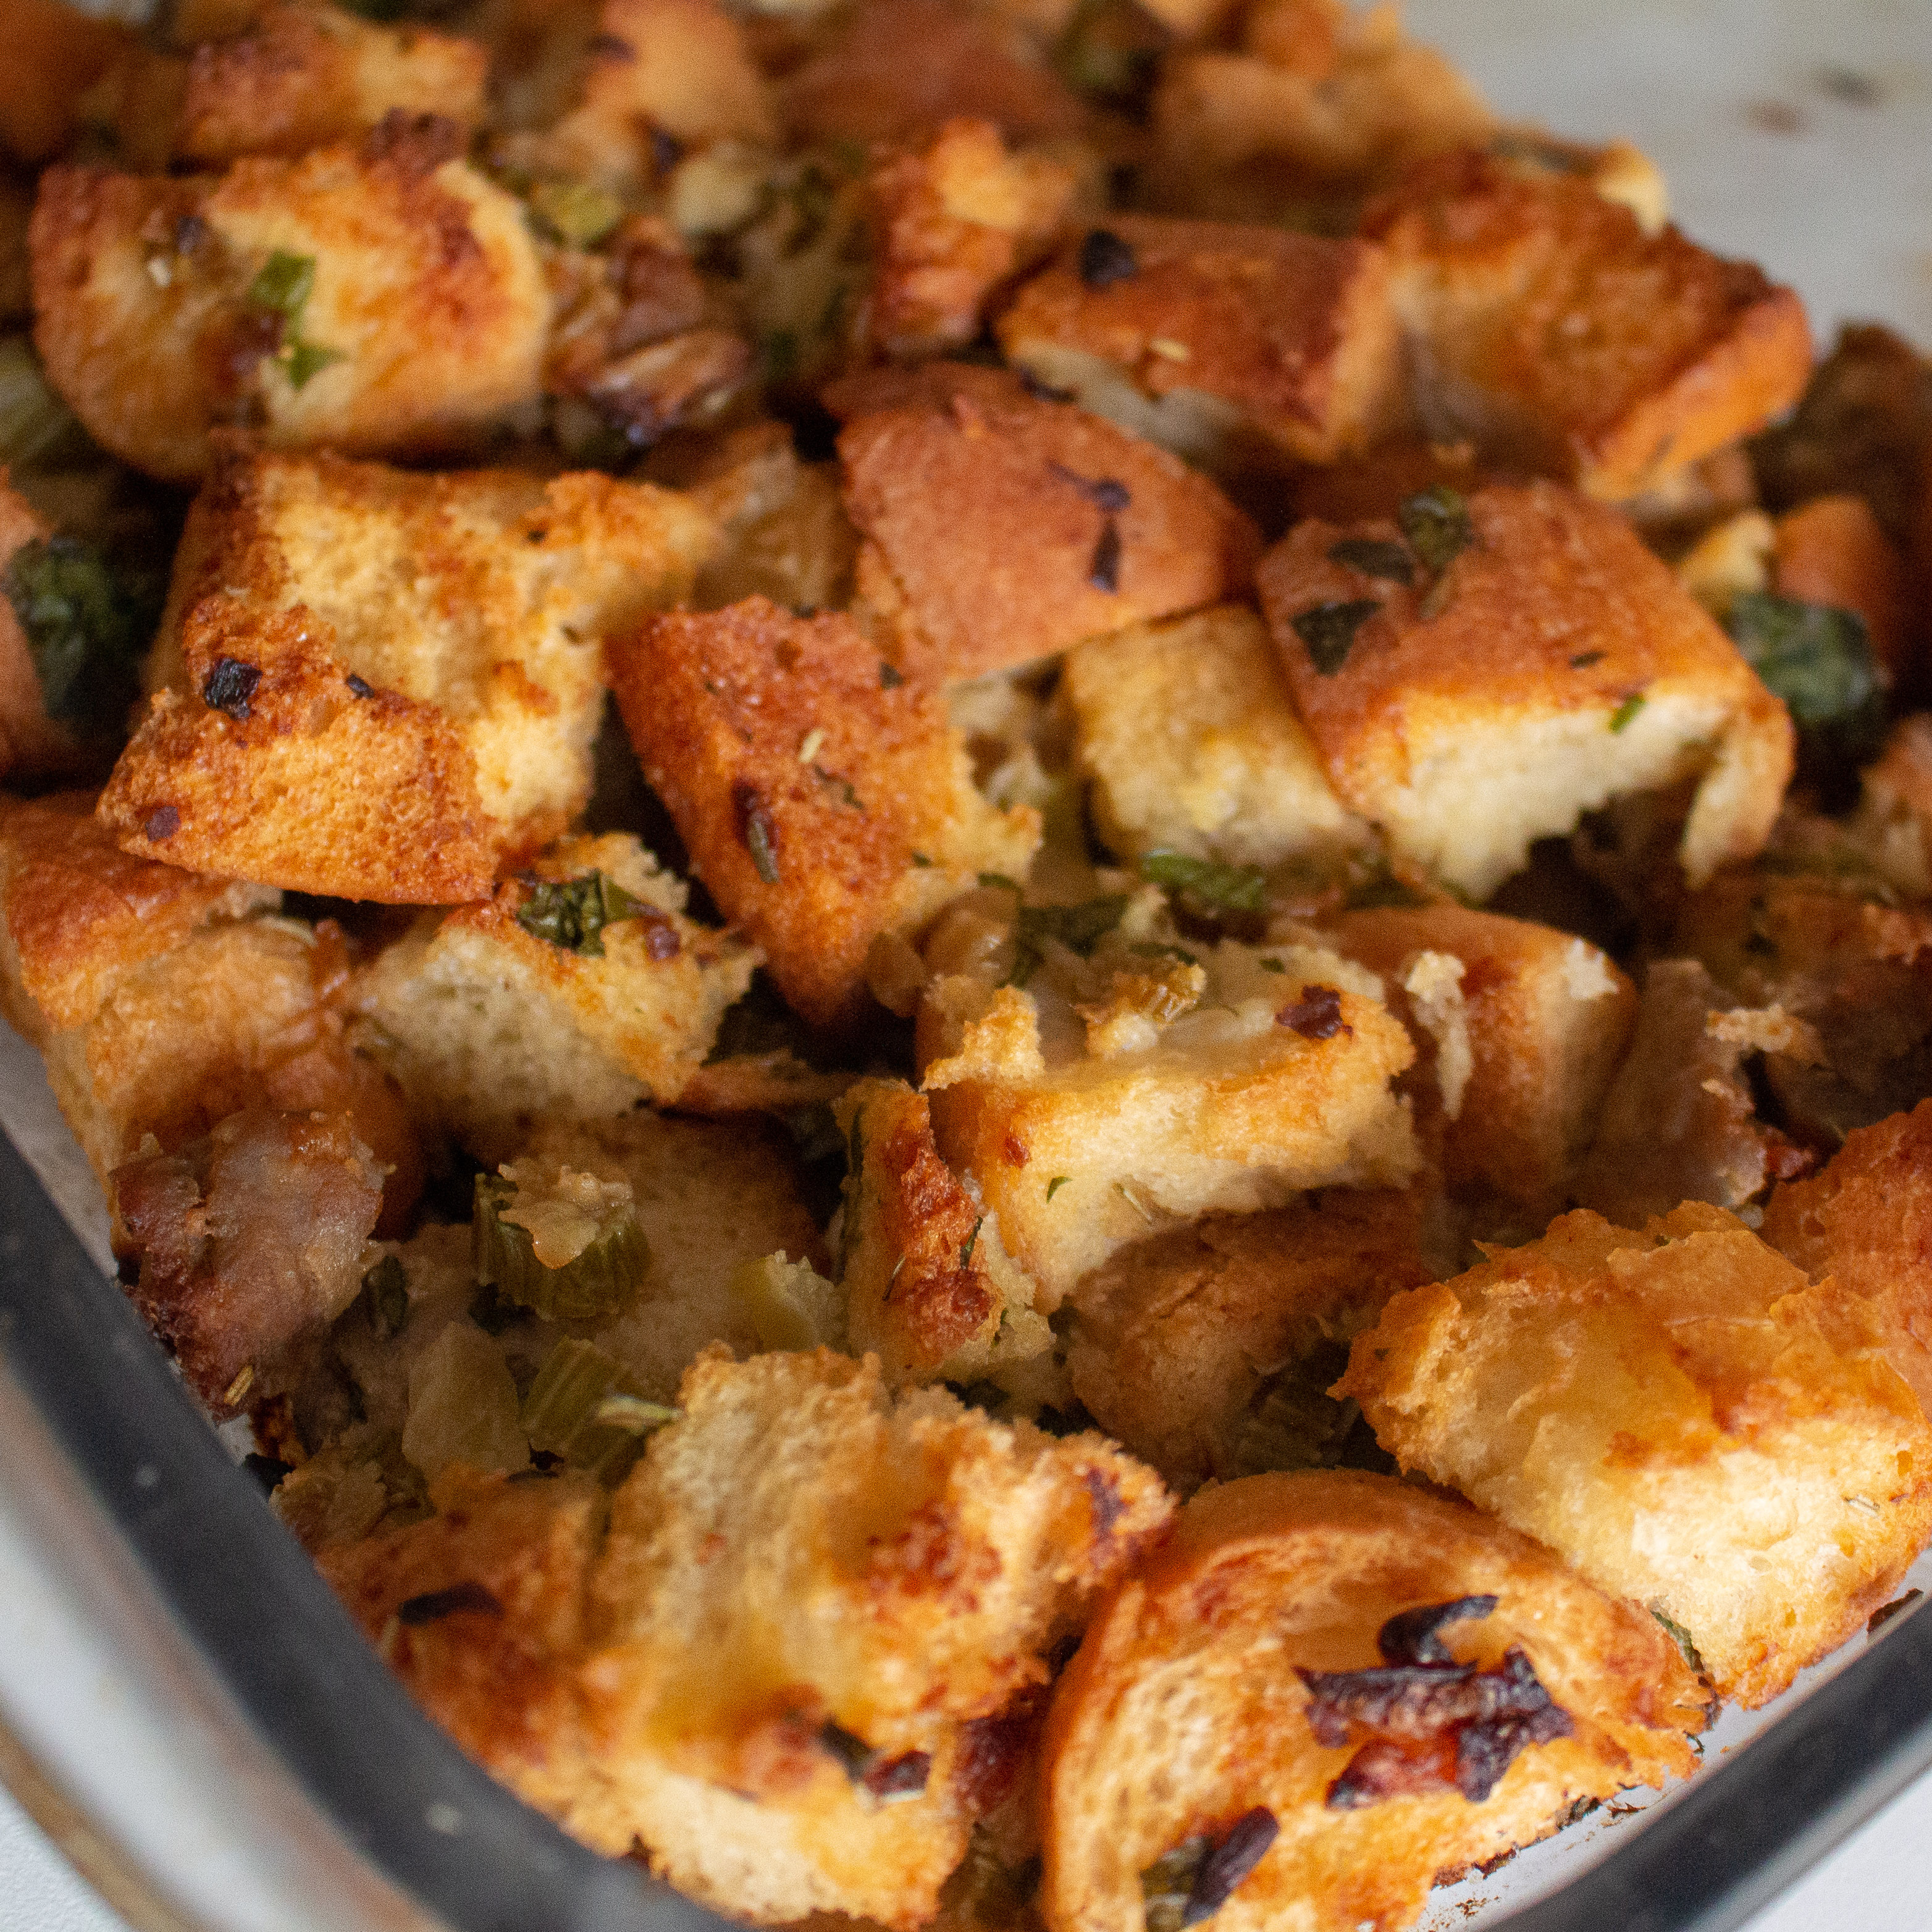 The perfect Thanksgiving stuffing: packed with flavor and never soggy!